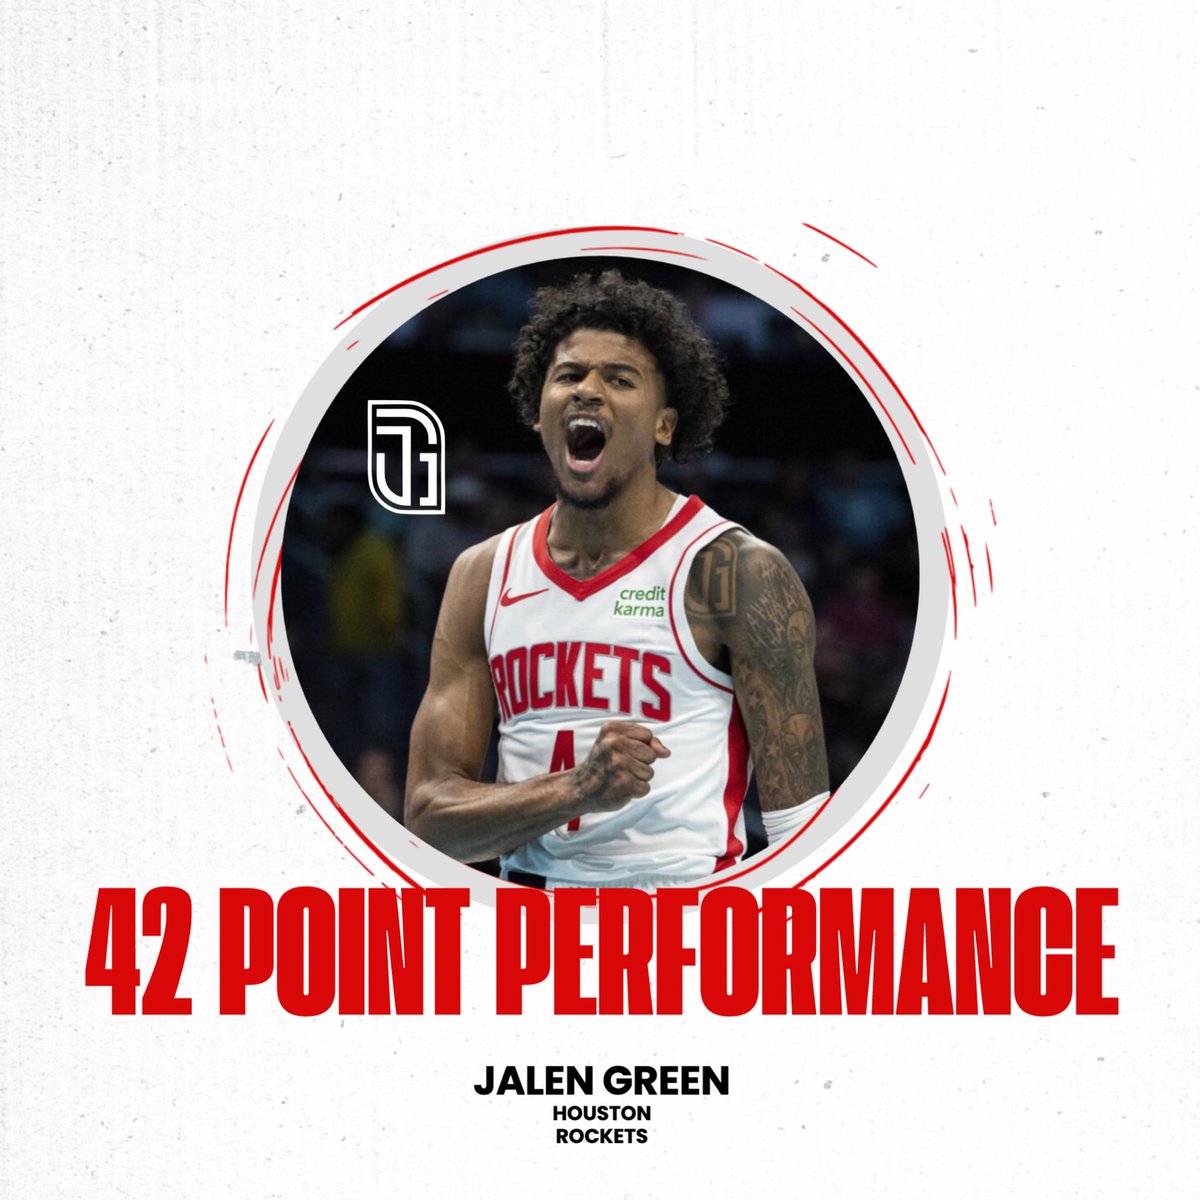 Another great performance from our guy 🫡 #JalenGreenElite